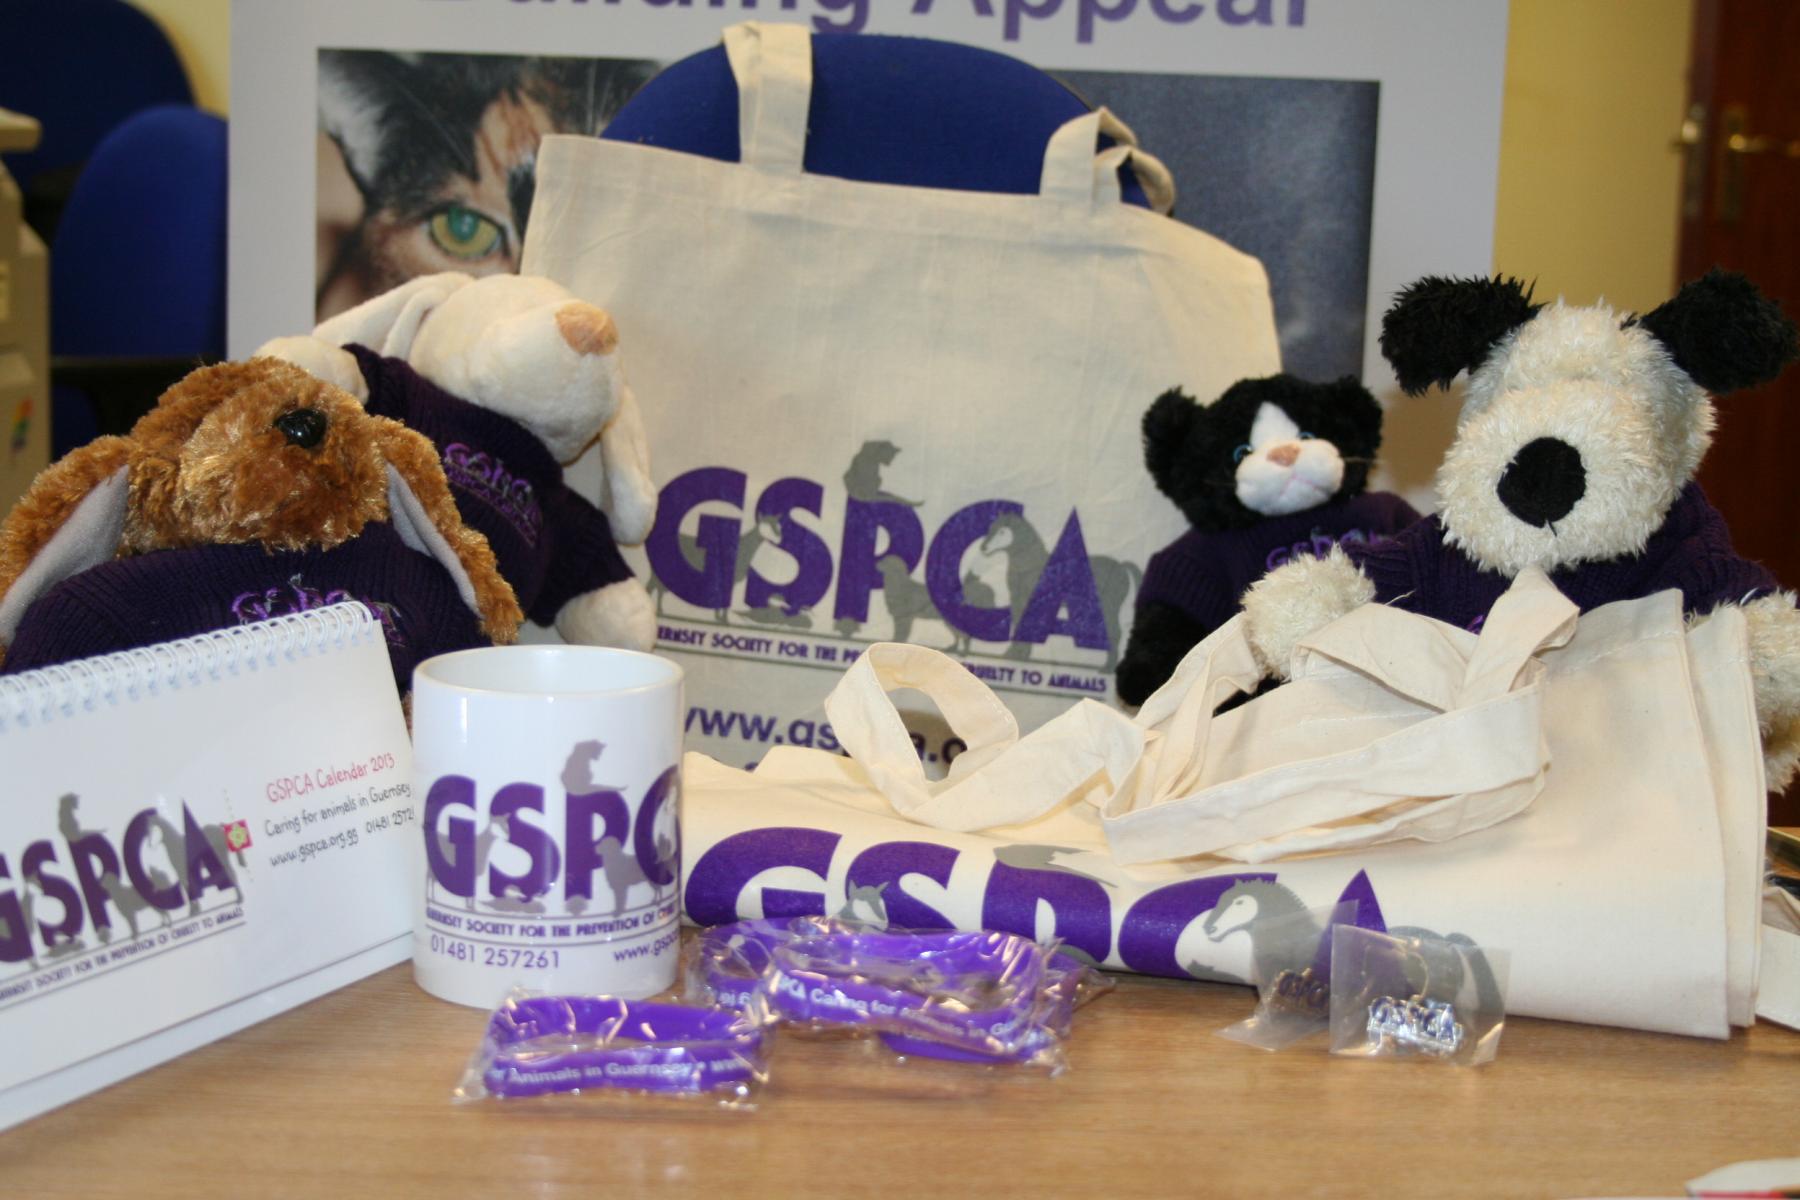 GSPCA Christmas goods on sale at the Late Night Shopping in St Peter Port Guernsey